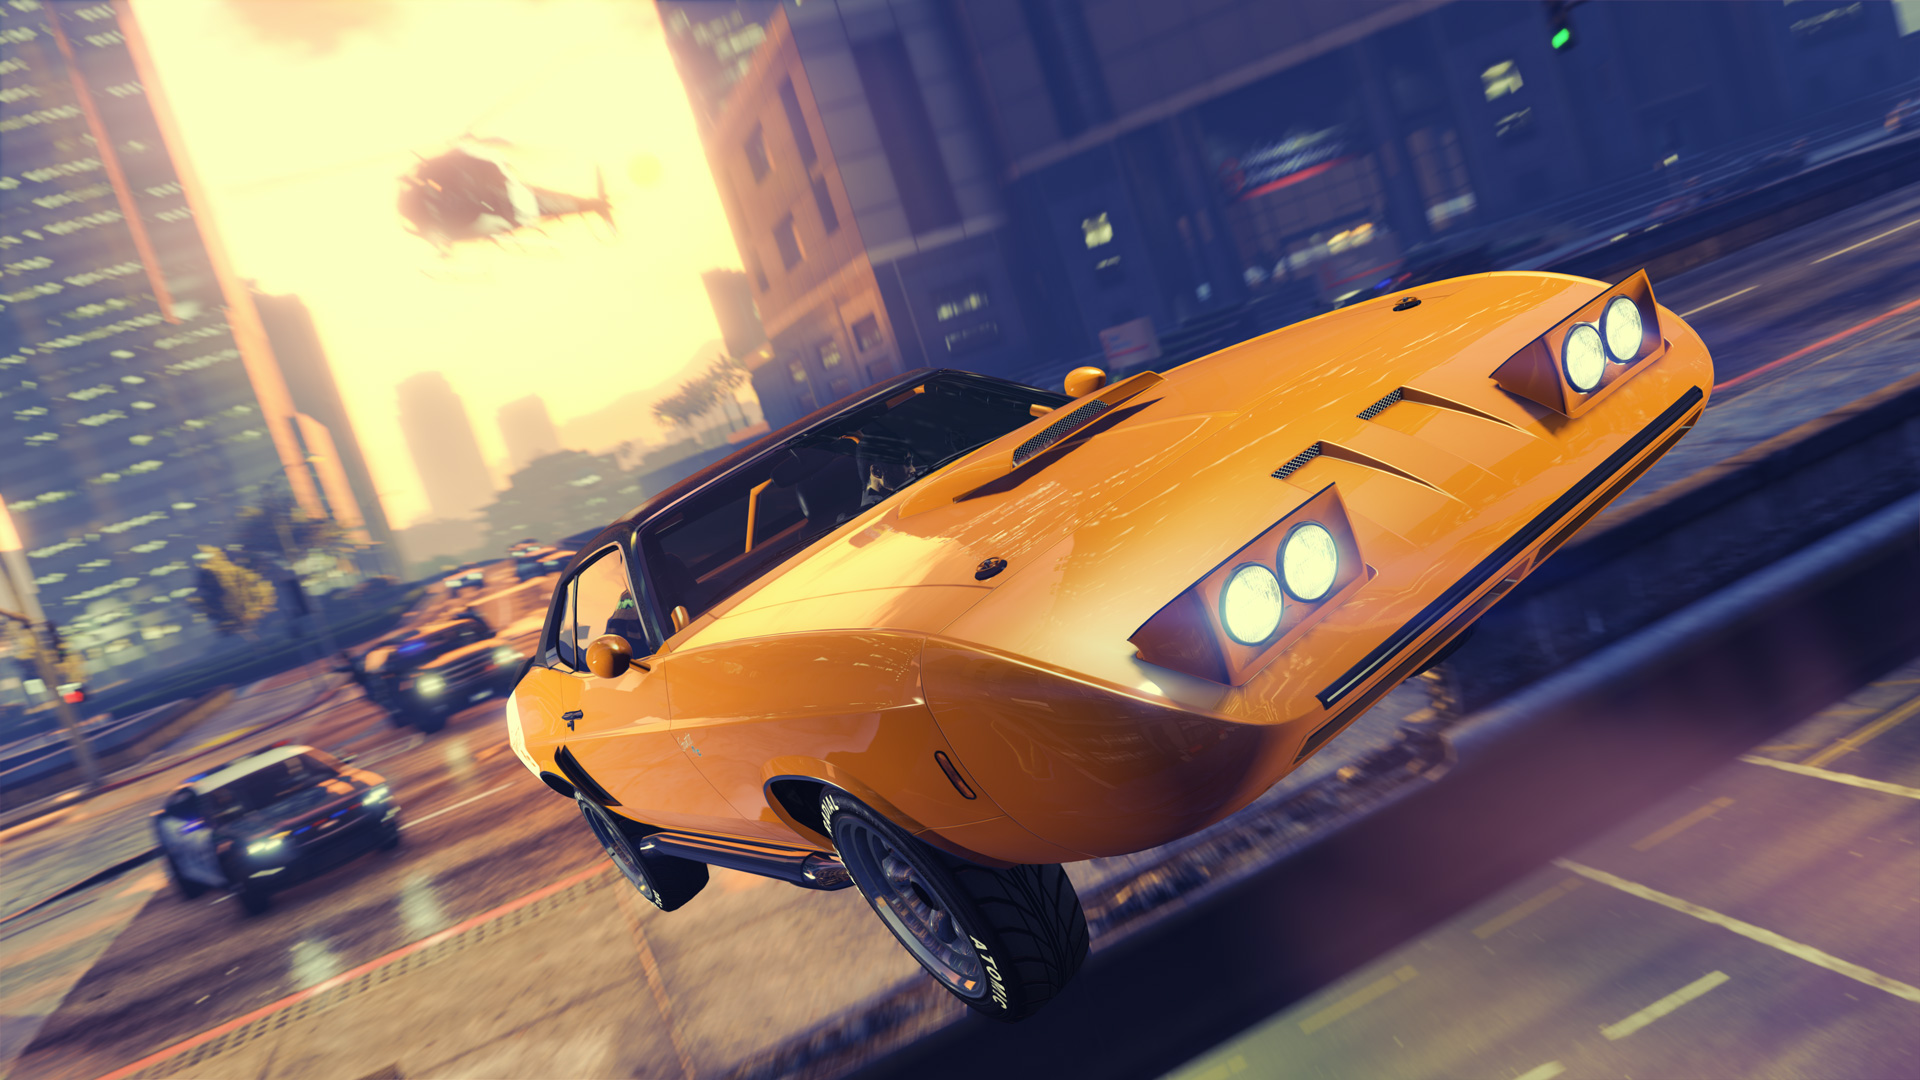 Illinois politician wants to ban Grand Theft Auto after increase in Chicago cars